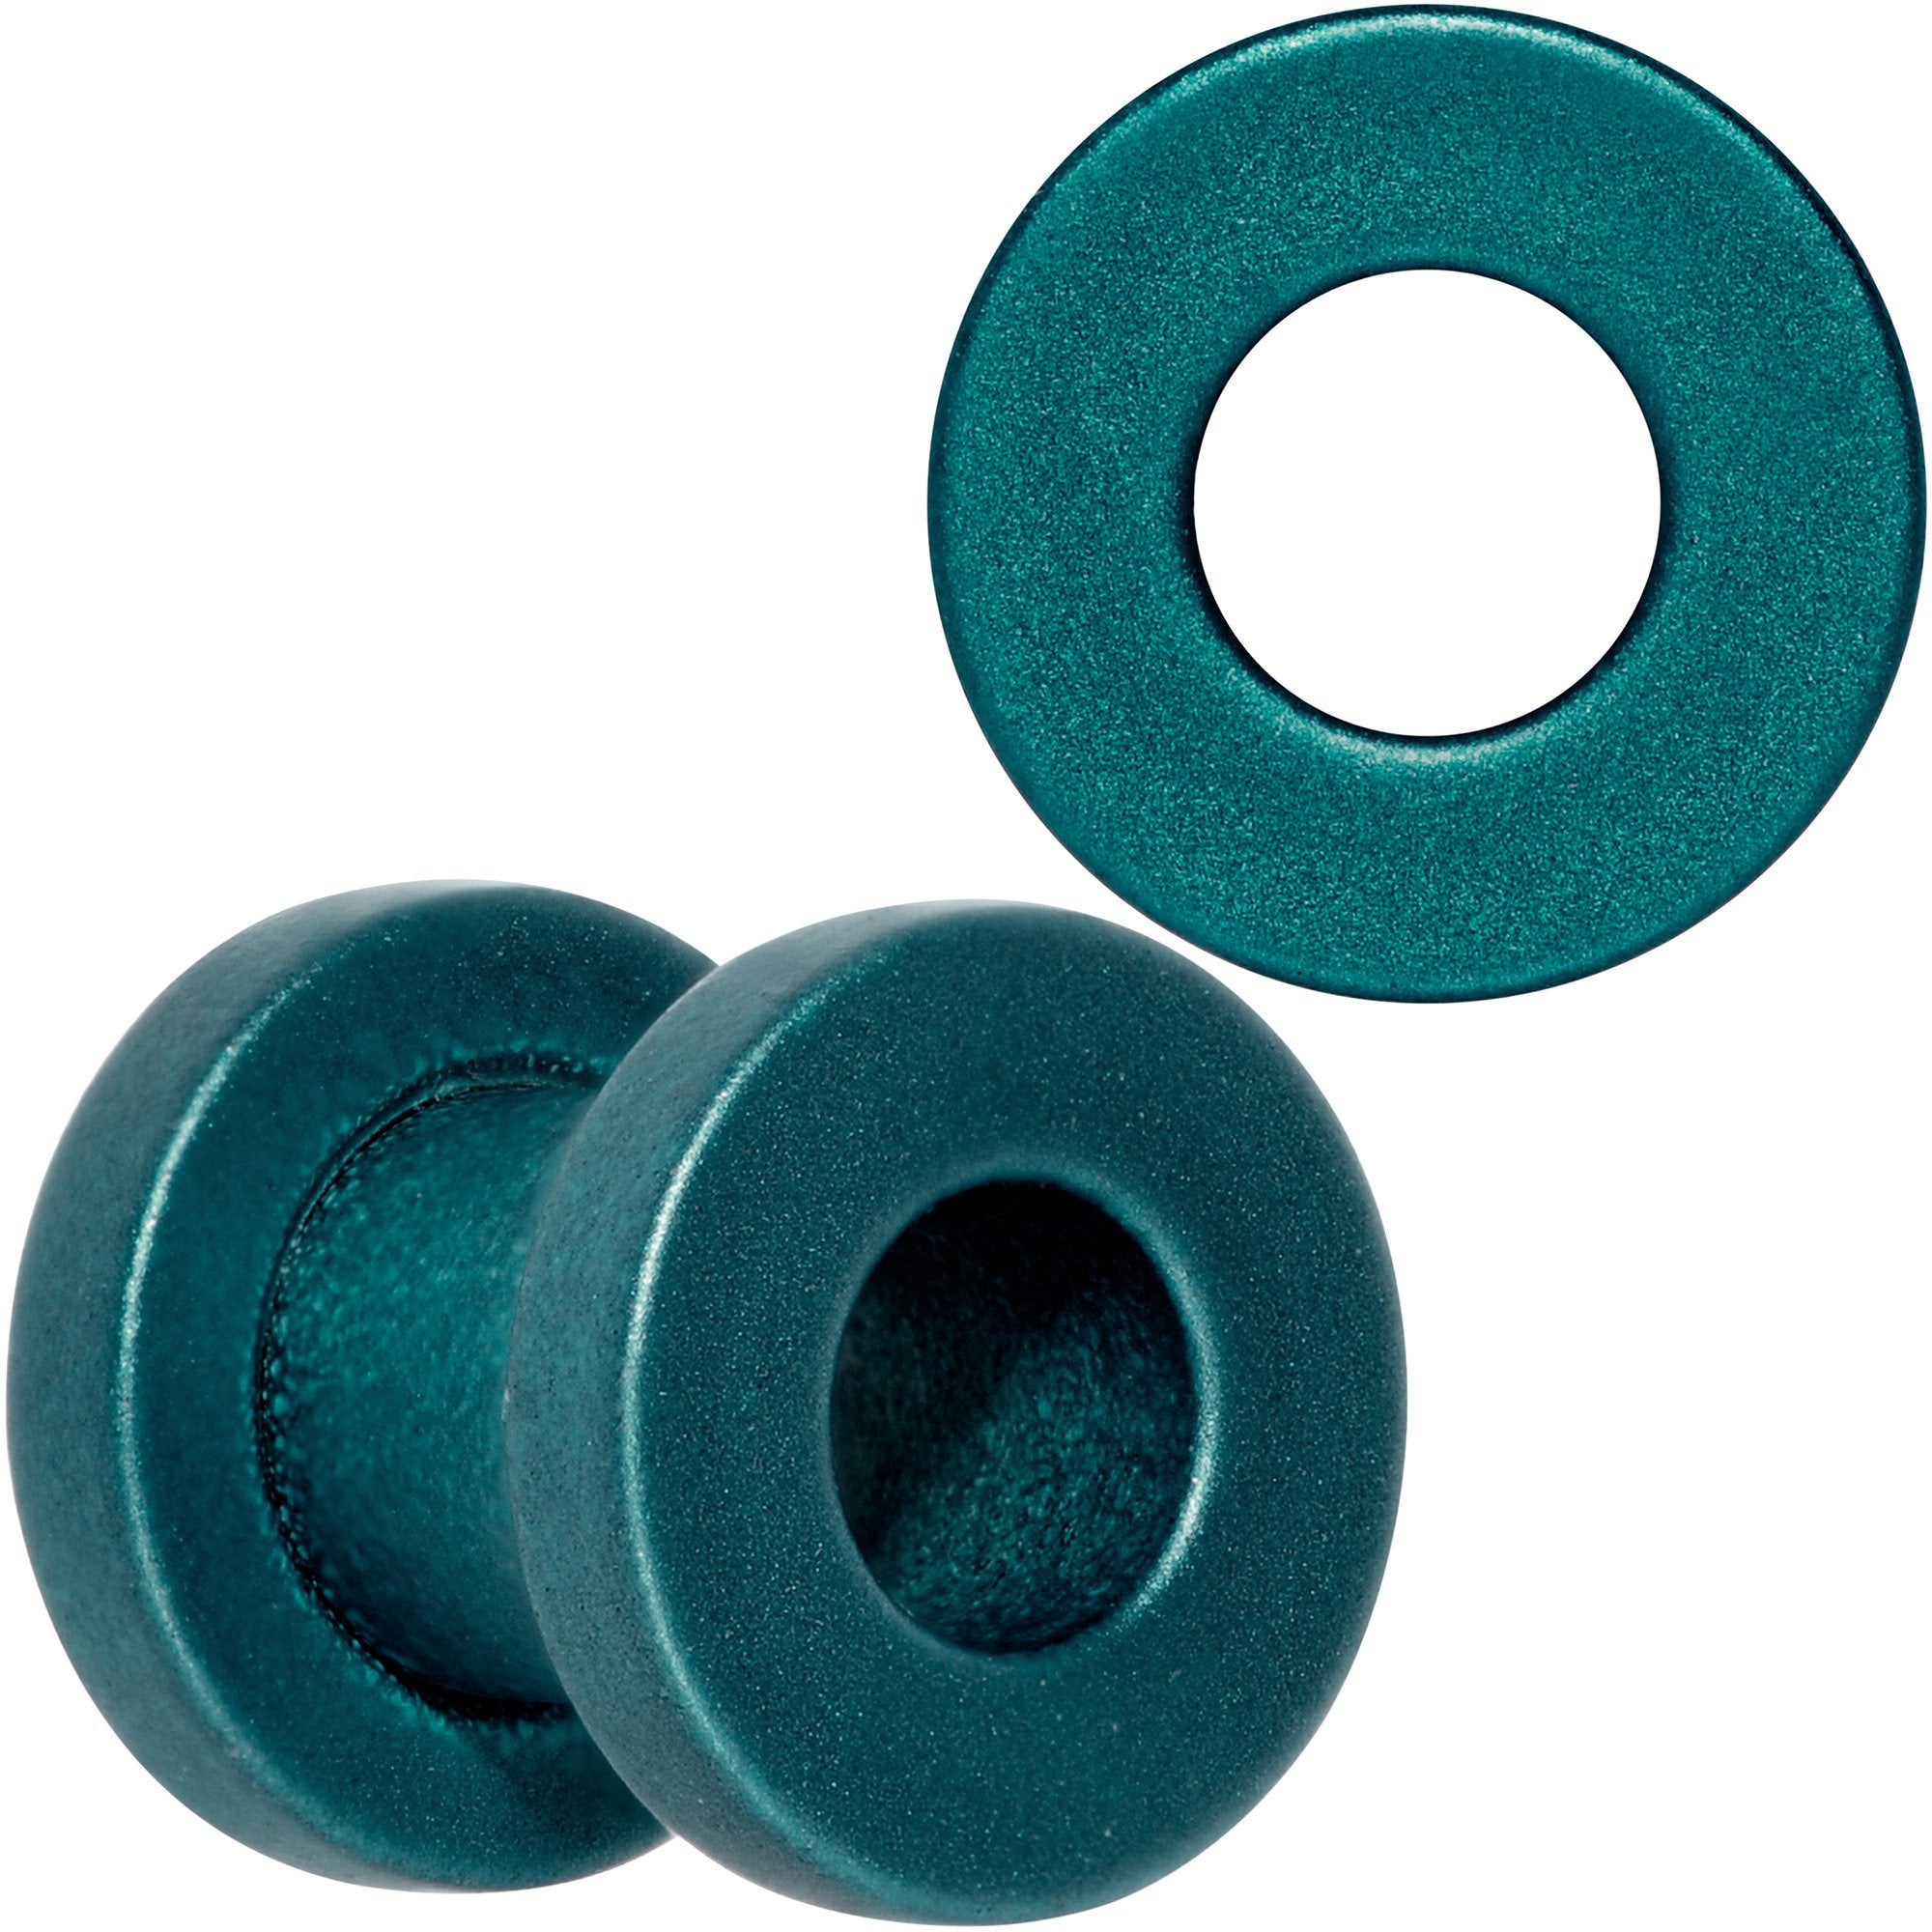 Teal Matte Silicone Screw Fit Tunnel Plug Set 6mm to 25mm